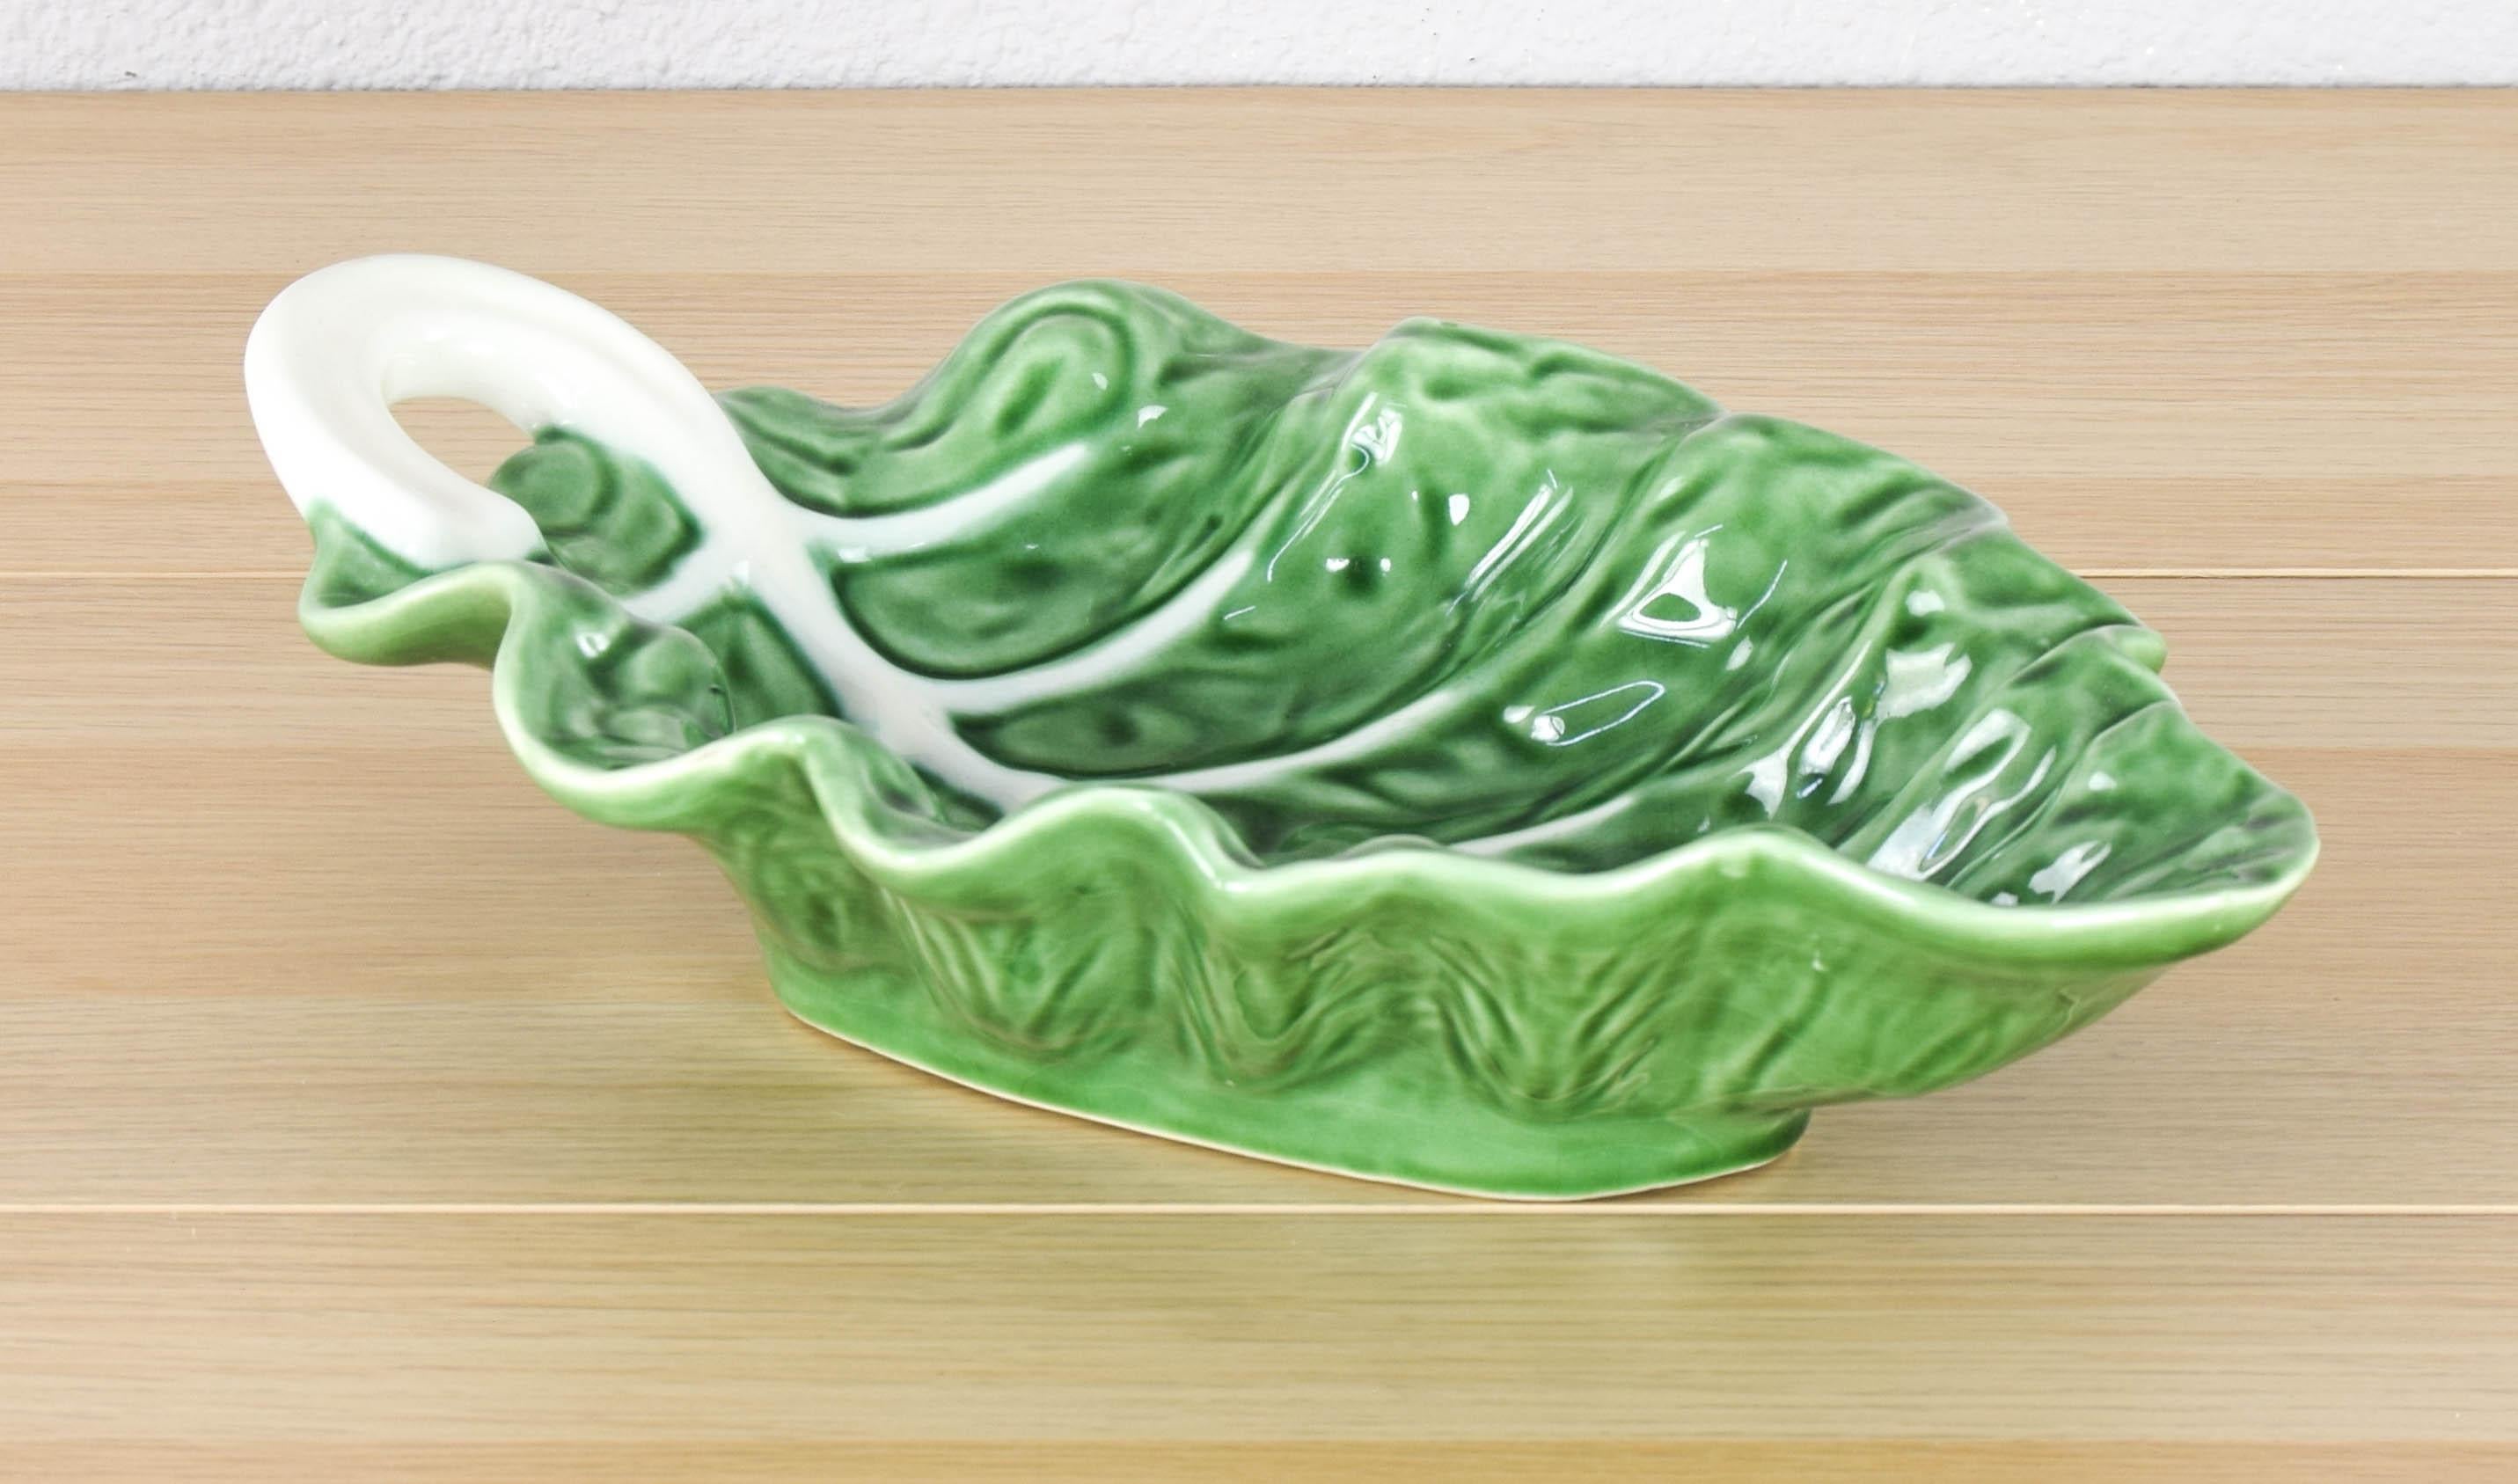 Beautiful and unique enameled ceramic salad bowl handmade in the shape of a cabbage leaf from Bordallo Pinheiro.
The salad bowl is in excellent condition, with no flaws.

These pieces, famous from the high society of the 60s, become unique thanks to